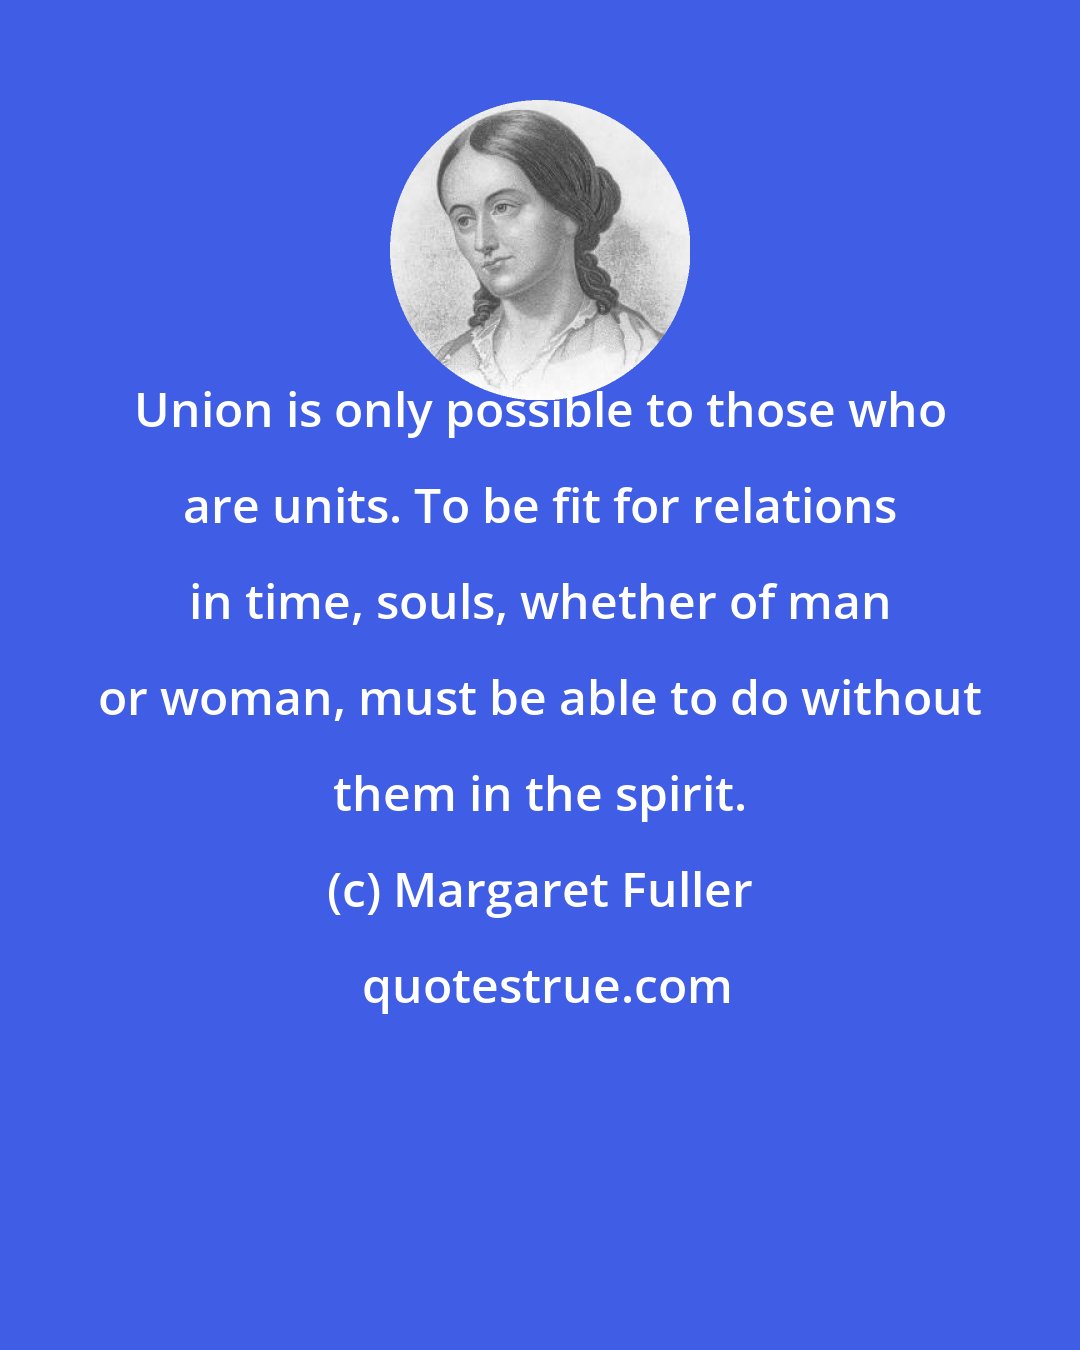 Margaret Fuller: Union is only possible to those who are units. To be fit for relations in time, souls, whether of man or woman, must be able to do without them in the spirit.